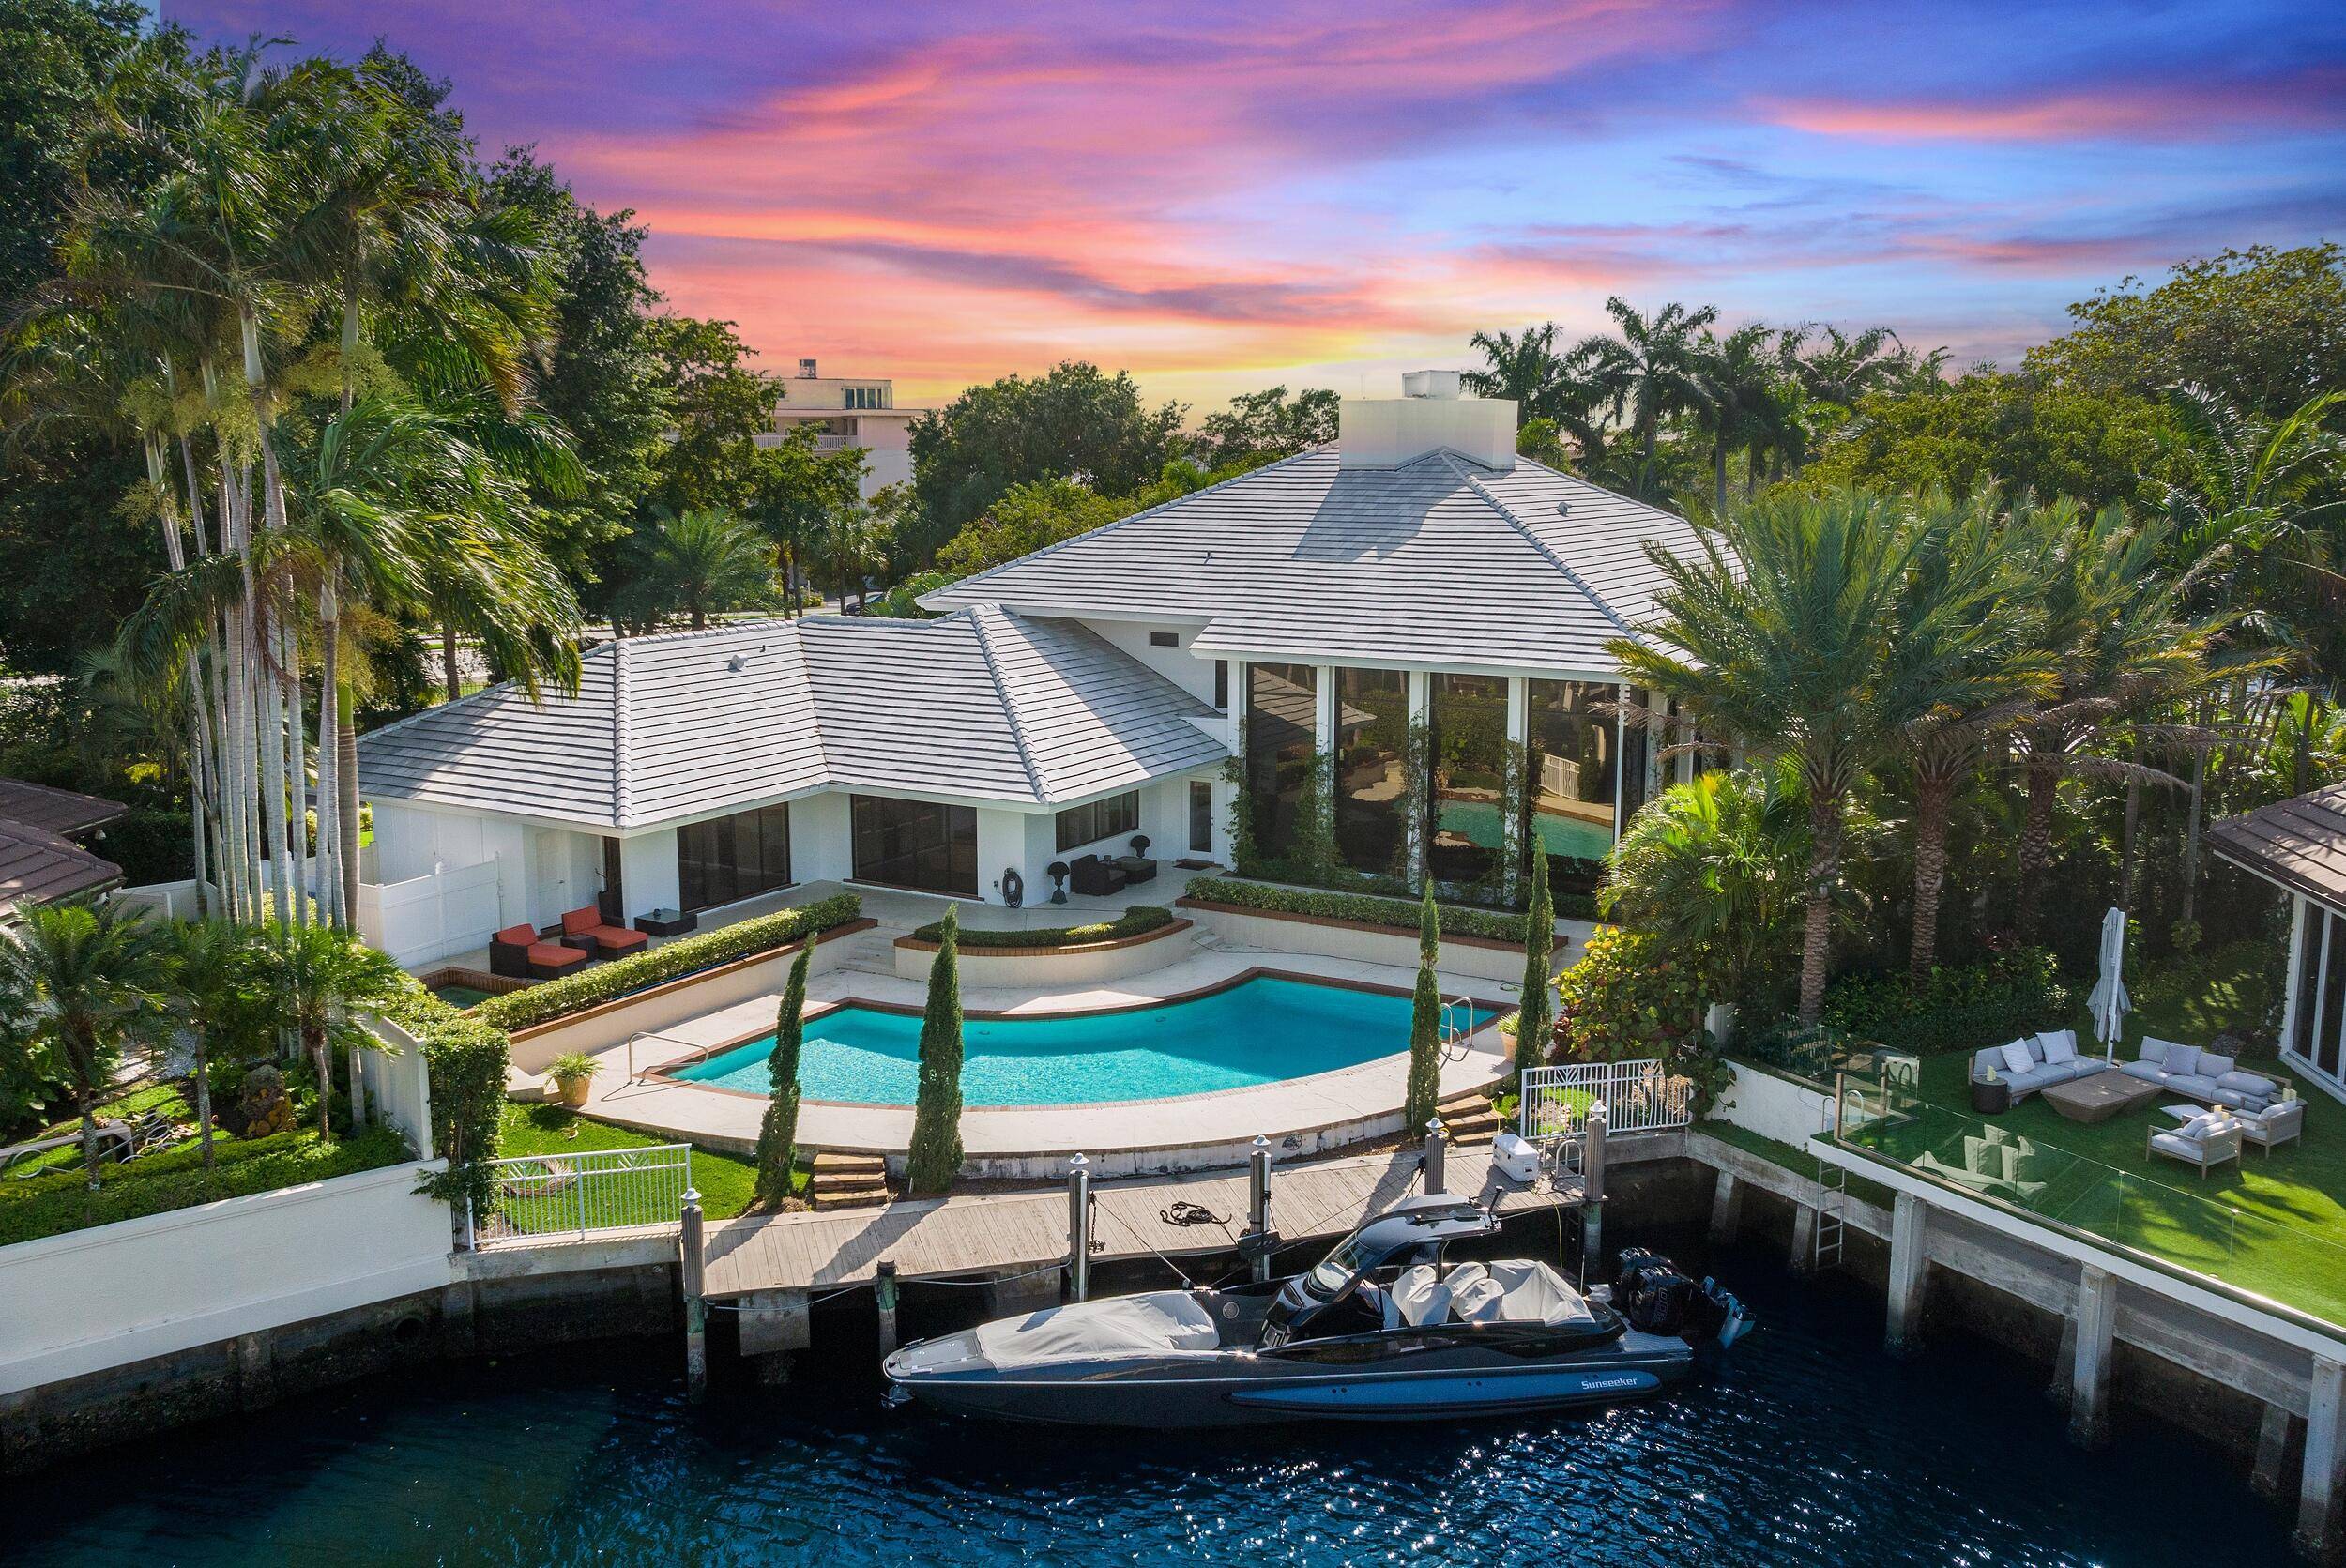 The ultra exclusive community of The Sanctuary sets the picturesque backdrop for this contemporary waterfront stunner.